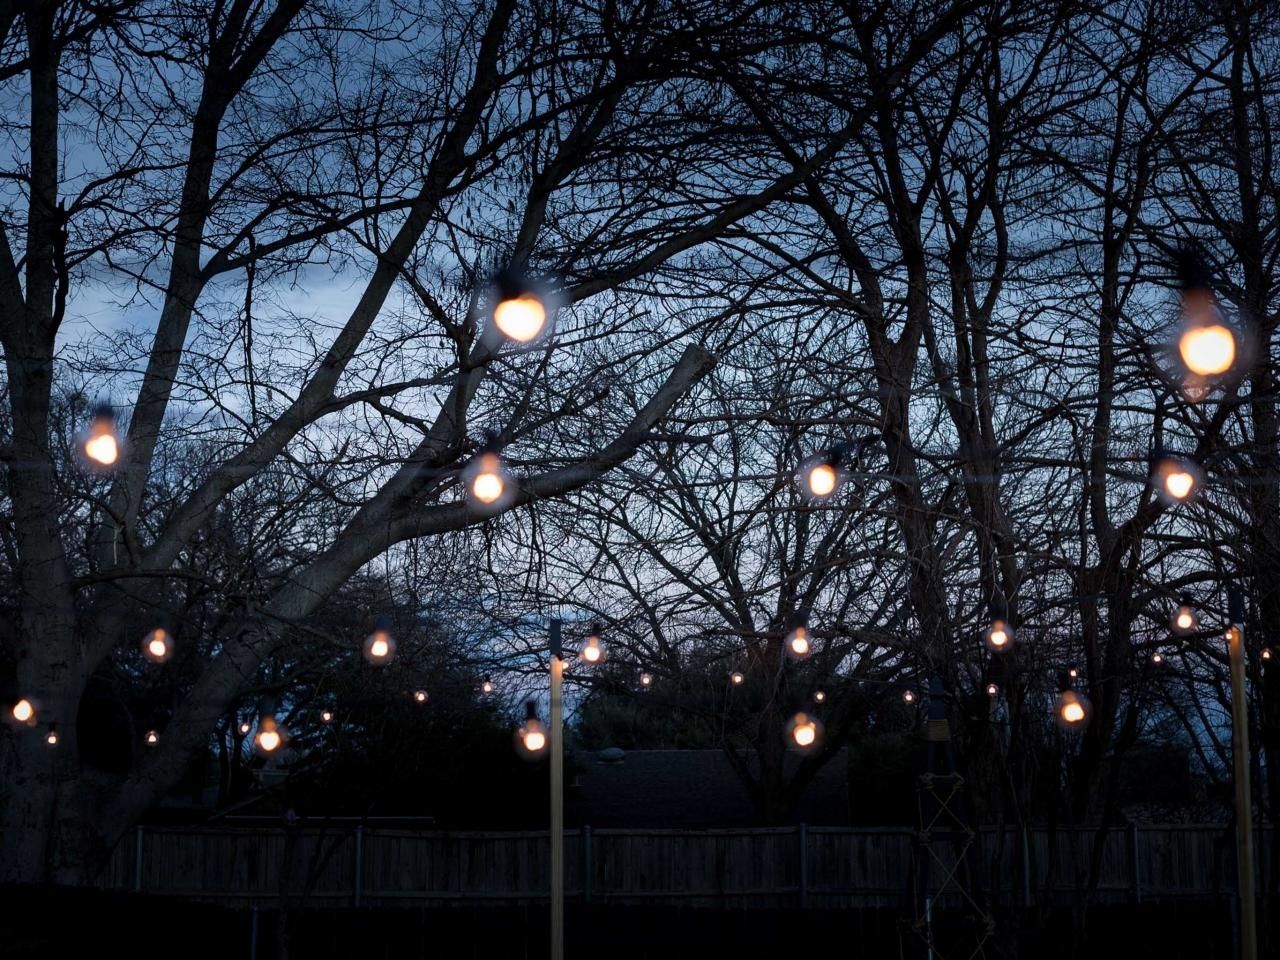 How To Hang Outdoor String Lights From Diy Posts | Hgtv In Outdoor Hanging Lights For Trees (View 7 of 15)